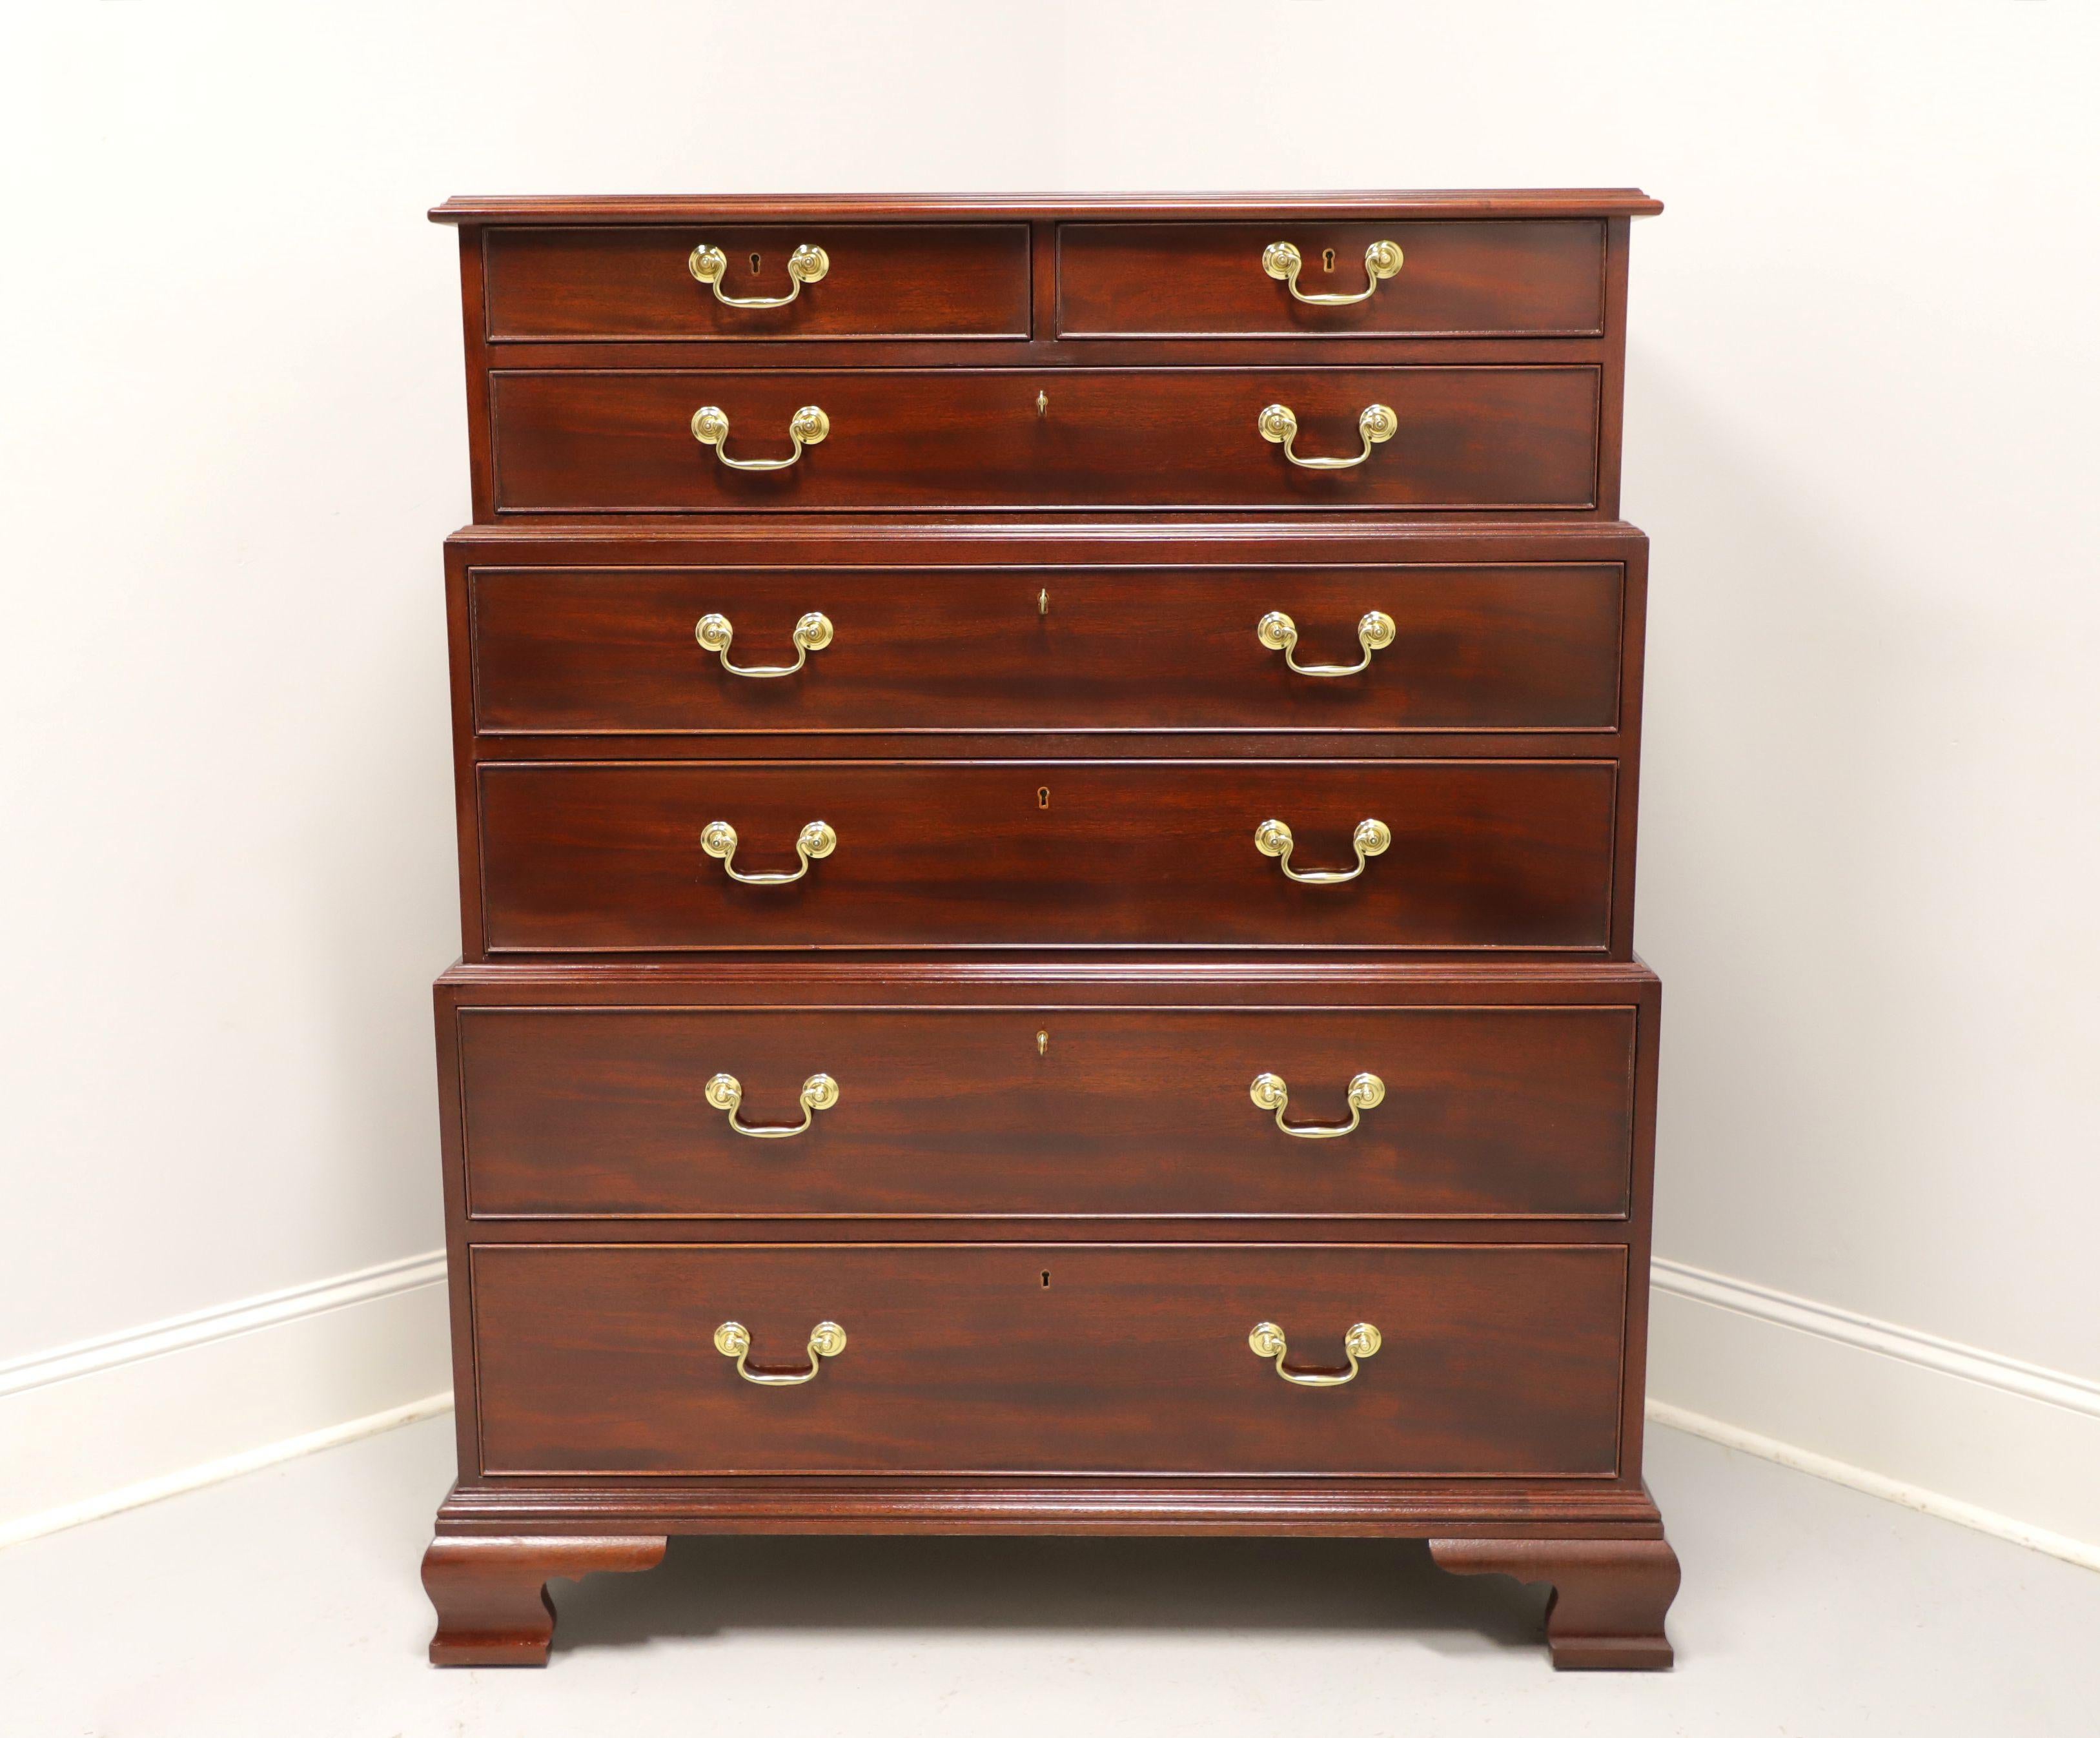 A reproduction of an 18th century design Chippendale style three-tier chest on chest by Baker Furniture, from their Historic Charleston Collection. Solid mahogany finest quality construction, brass hardware, triple stacking chests with brass handles